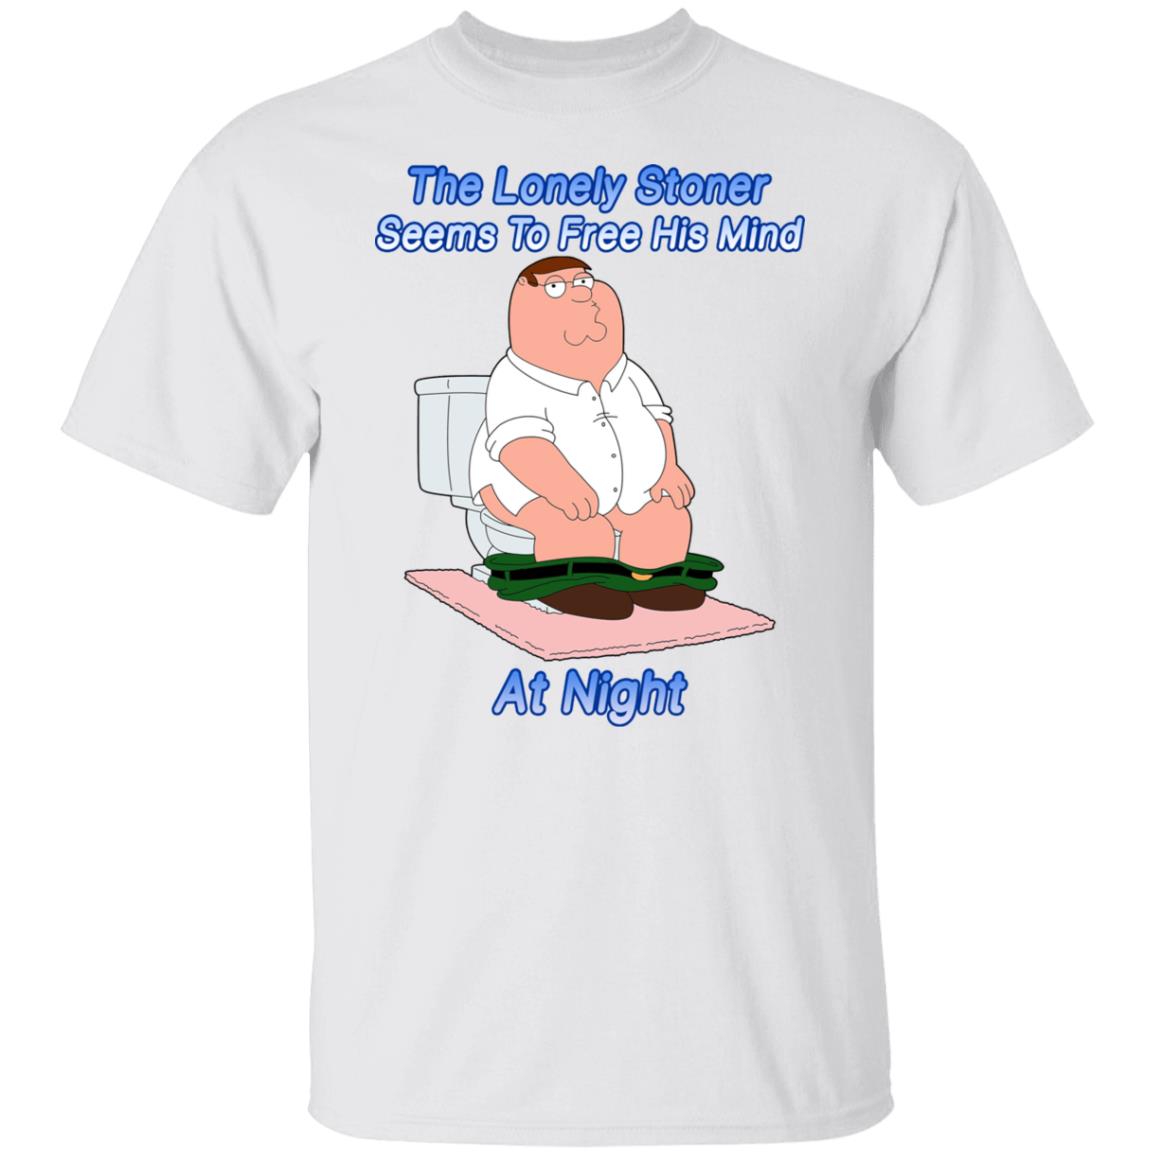 Family Guy T-shirt The Lonely Stoner Seems to Free His Mind at Night Peter Griffin Version Shirt Funny Meme Family Guy Shirt